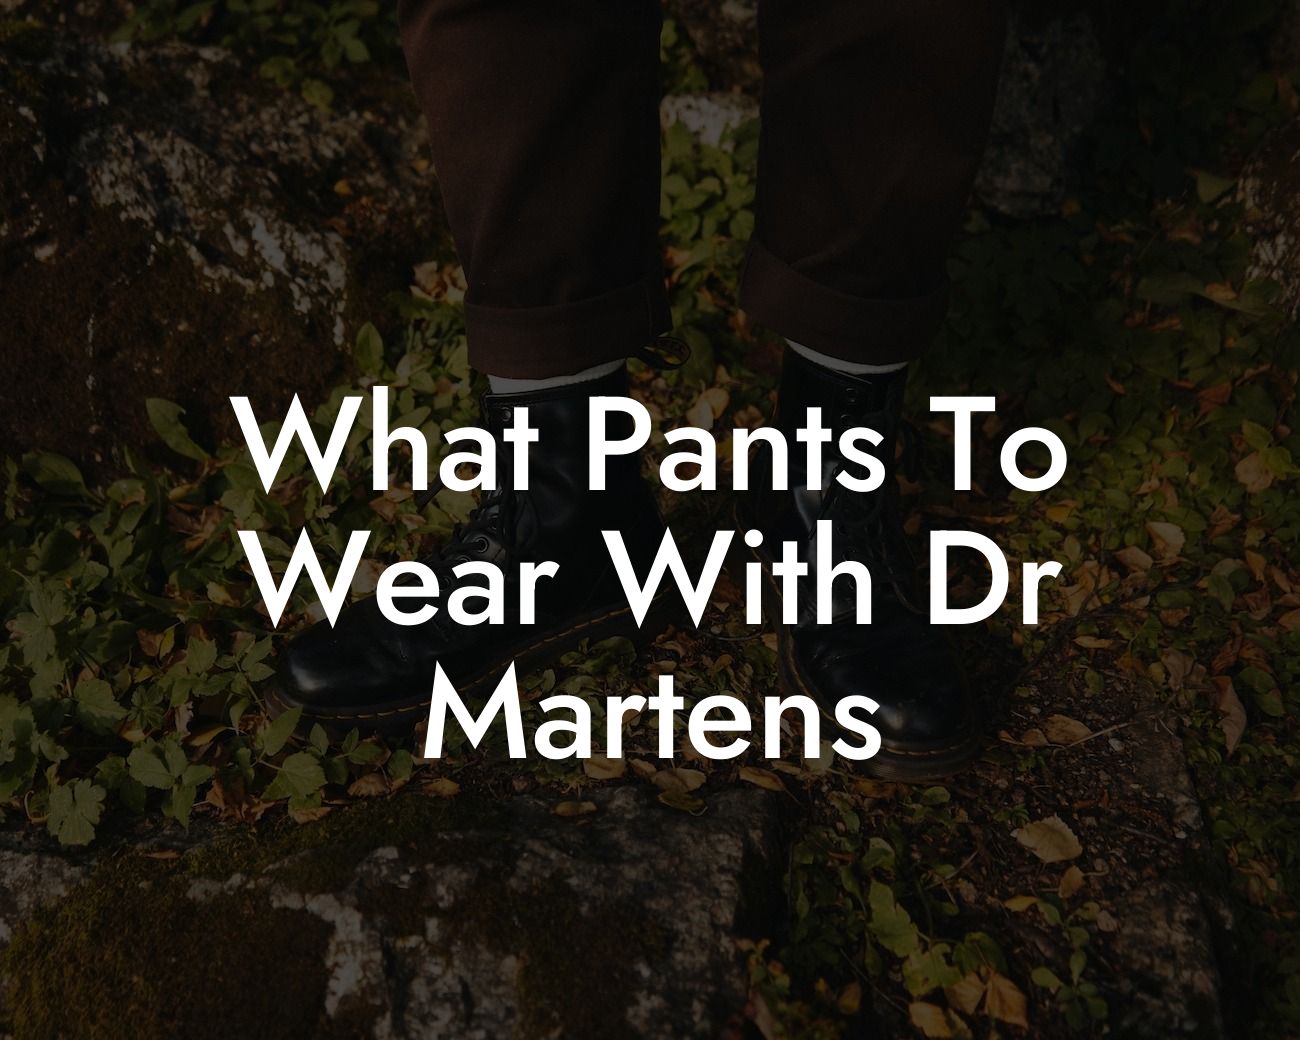 What Pants To Wear With Dr Martens